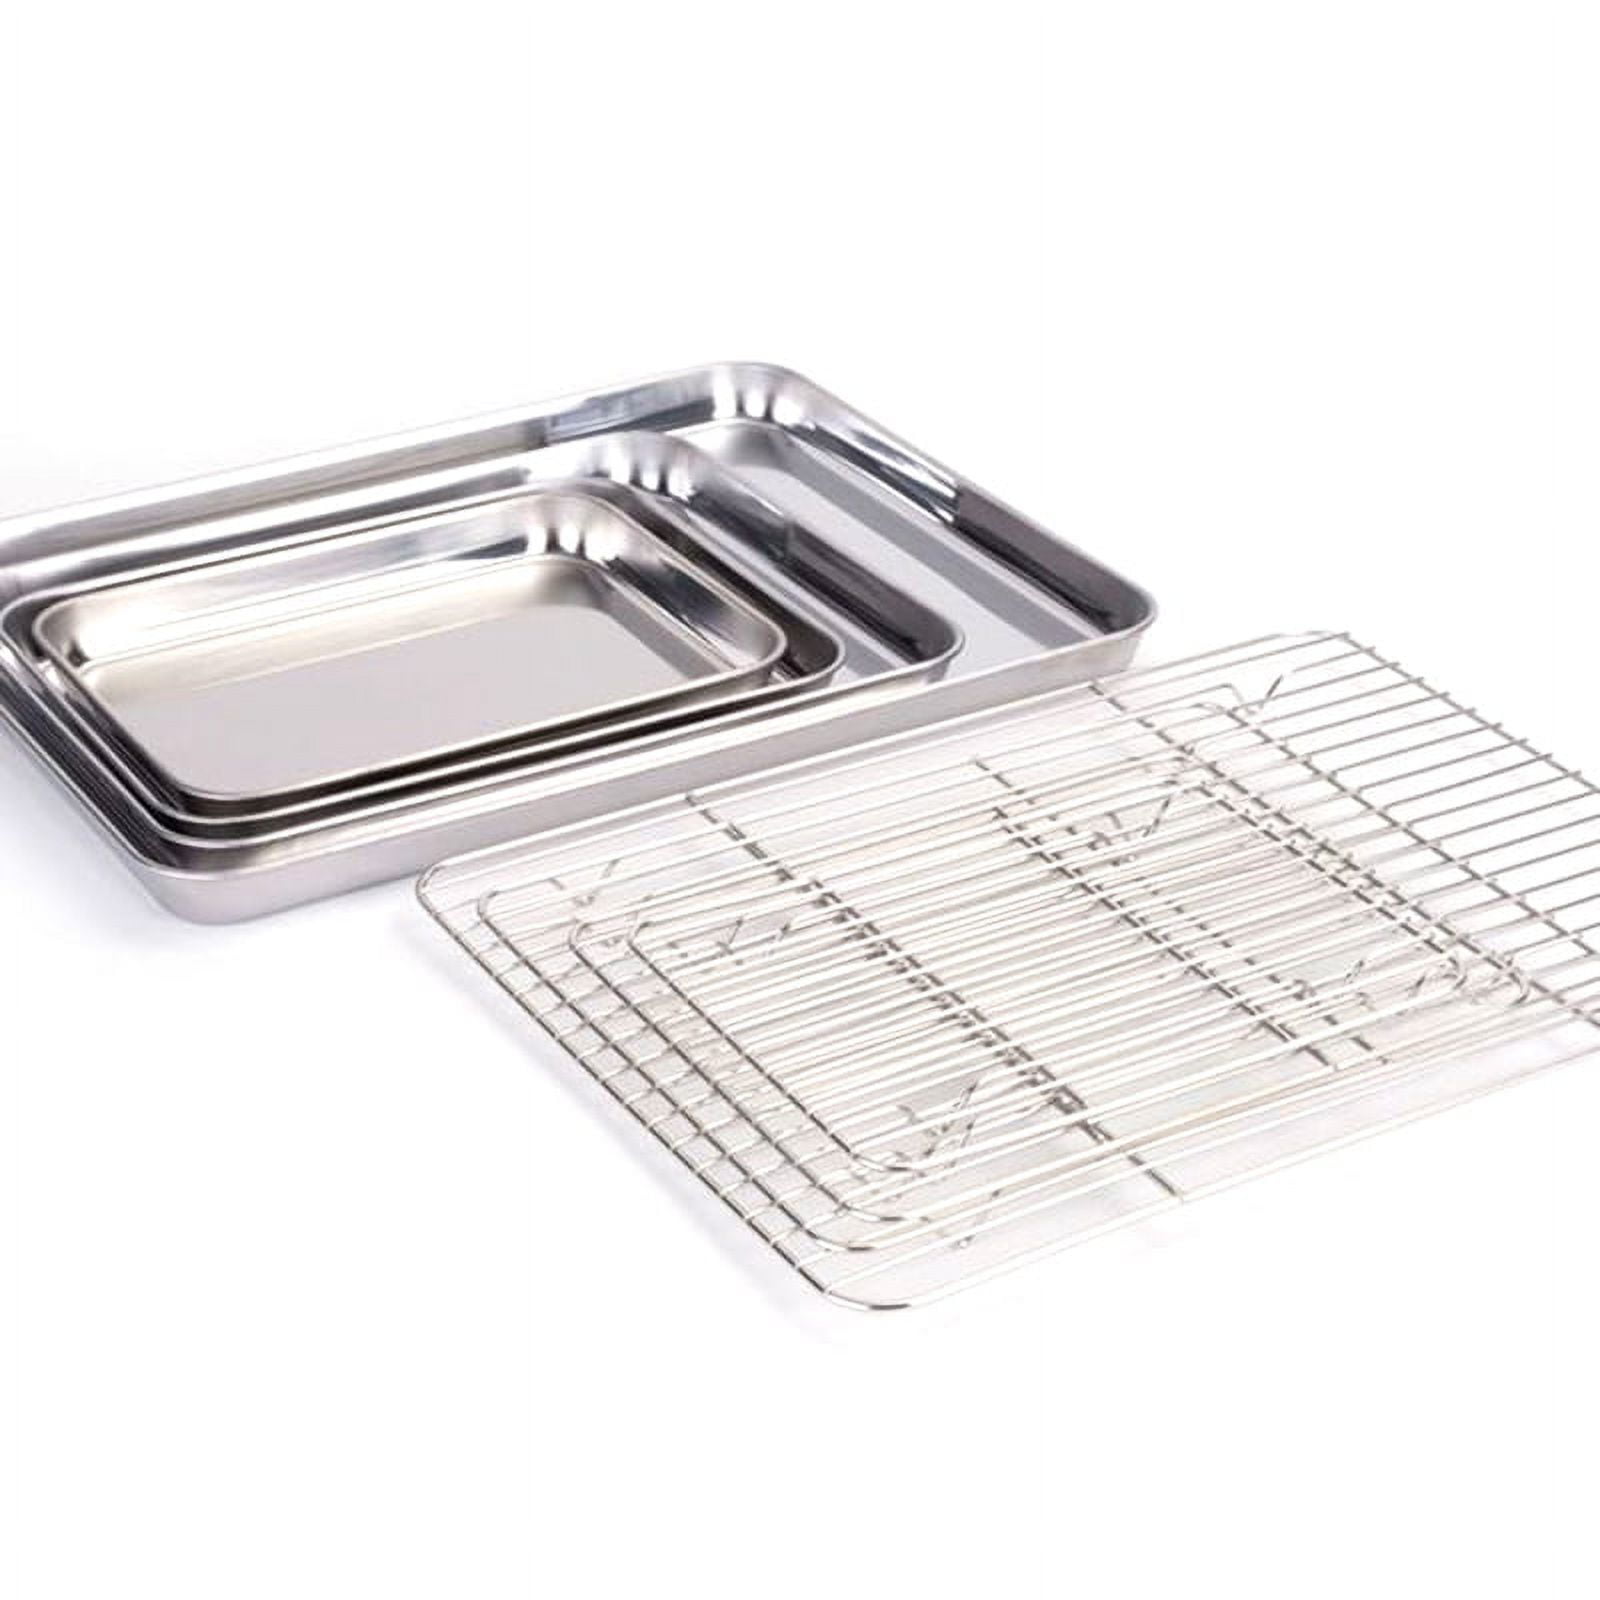  Oven-Safe Baking Pan with Cooling Rack Set - Quarter Sheet Pan  Size - Includes Premium Aluminum Baking Sheet and 100% Stainless Steel Baking  Rack for Oven - Durable, Easy Clean, Commercial